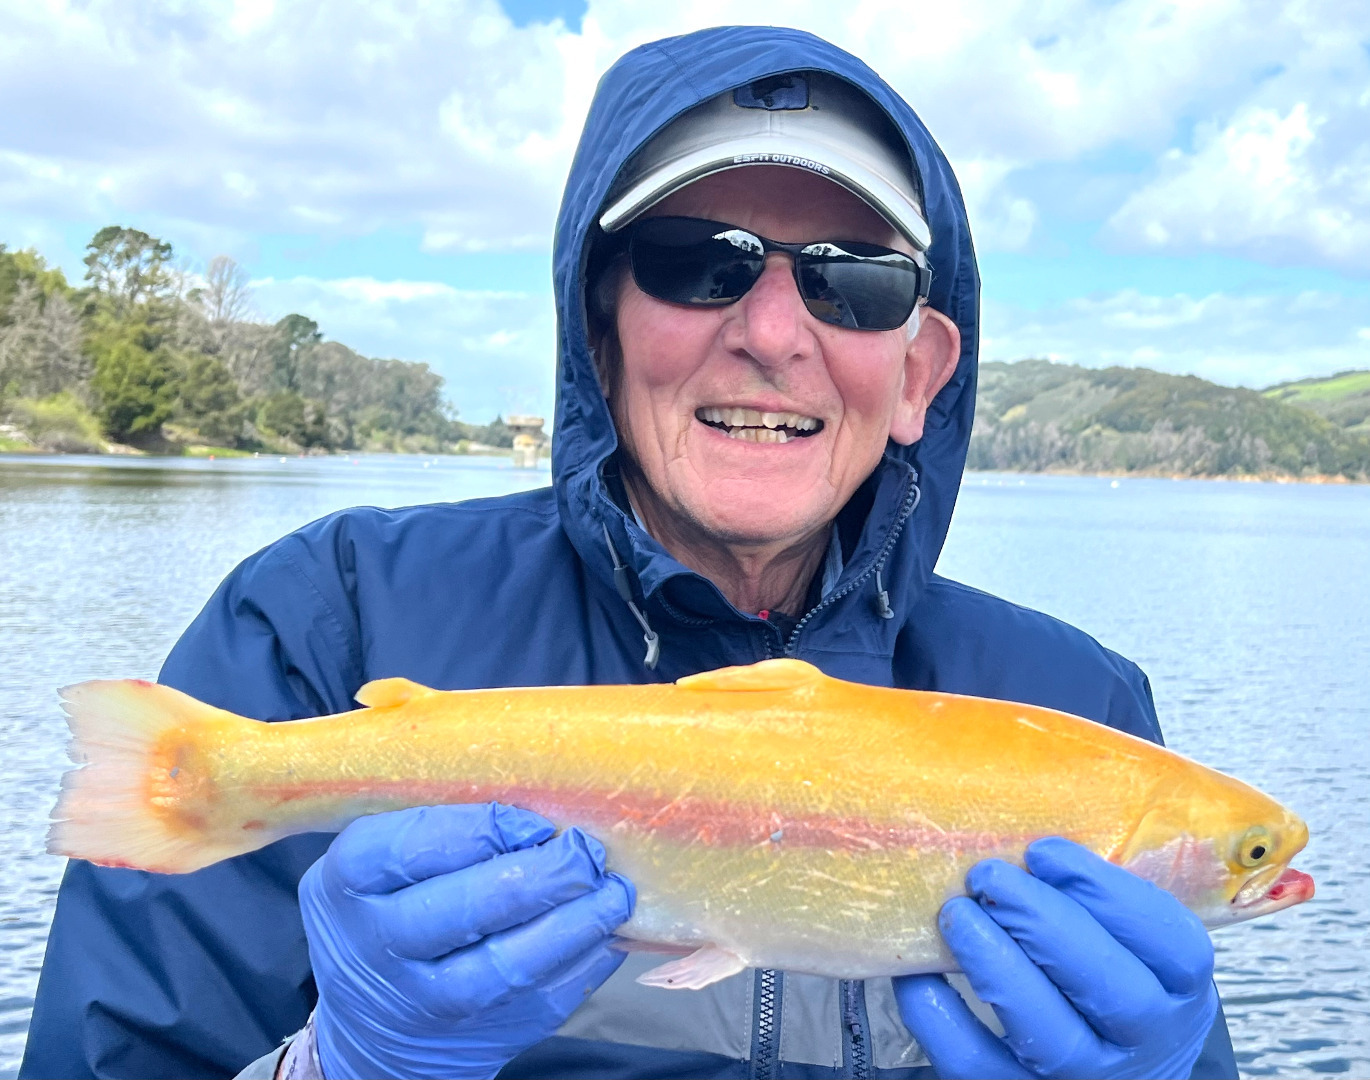 IronGate Reservoir Fishing Report by Charles Cornelison